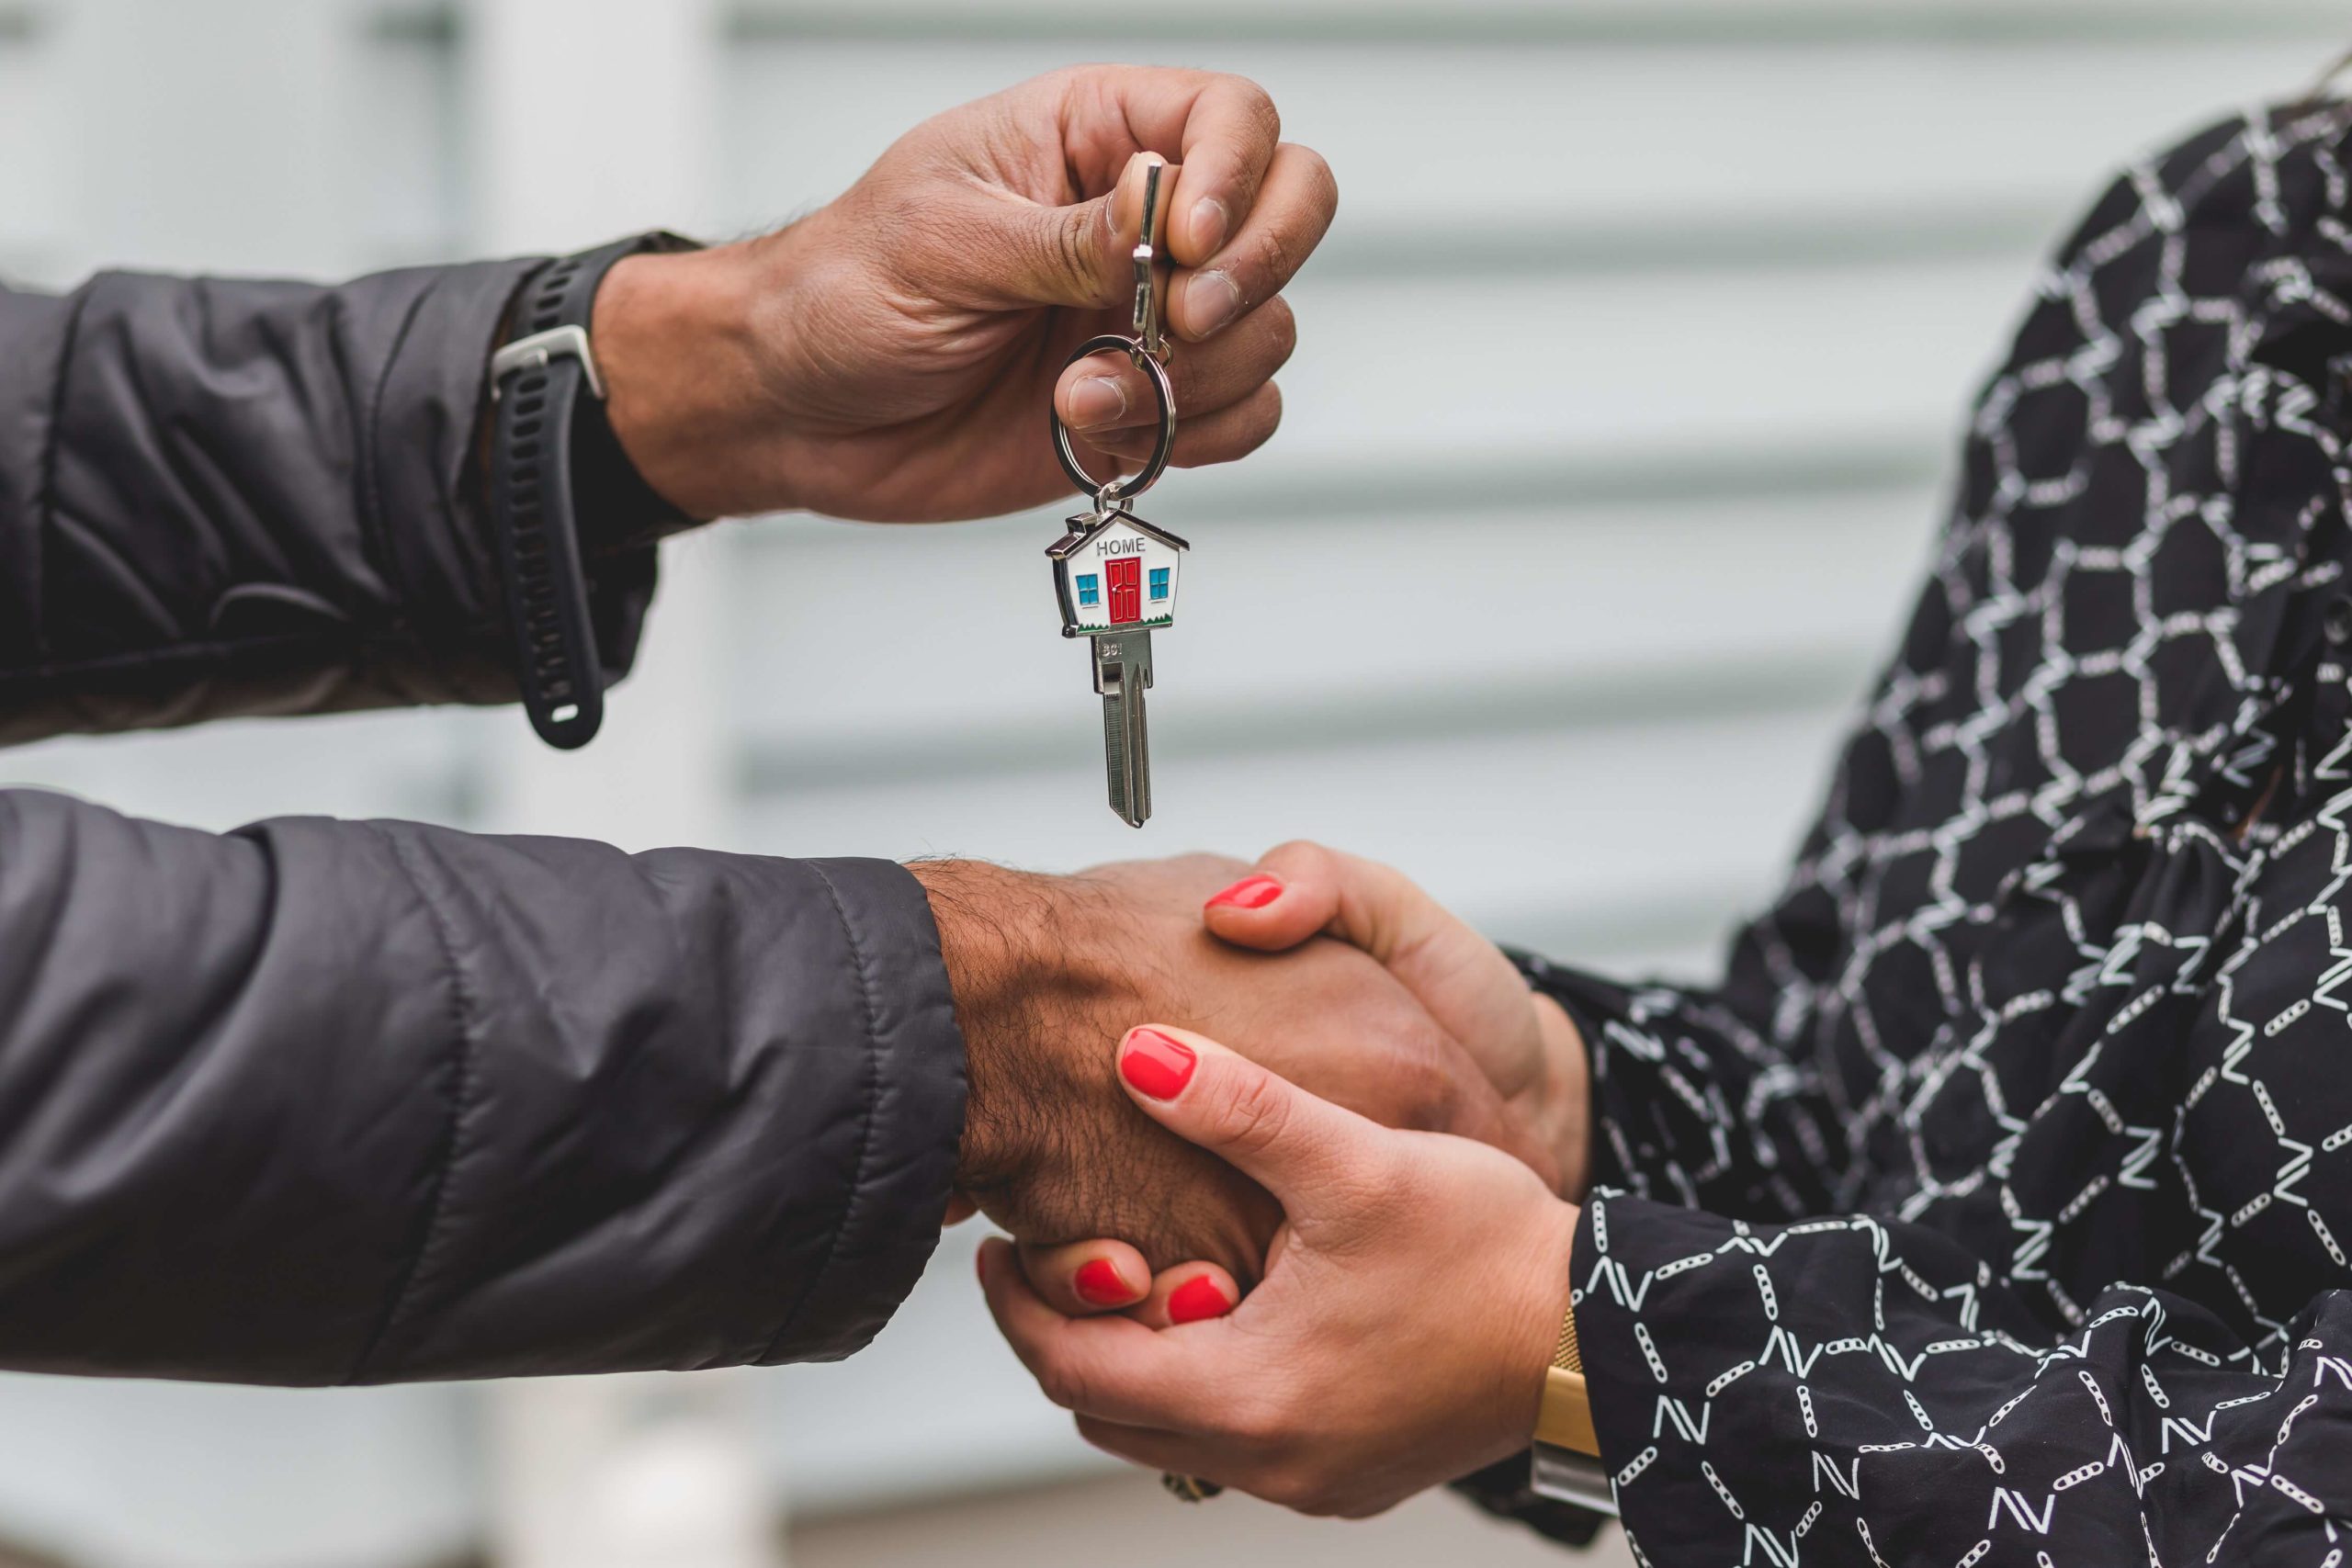 Landlord shaking tenant's hand and handing over key